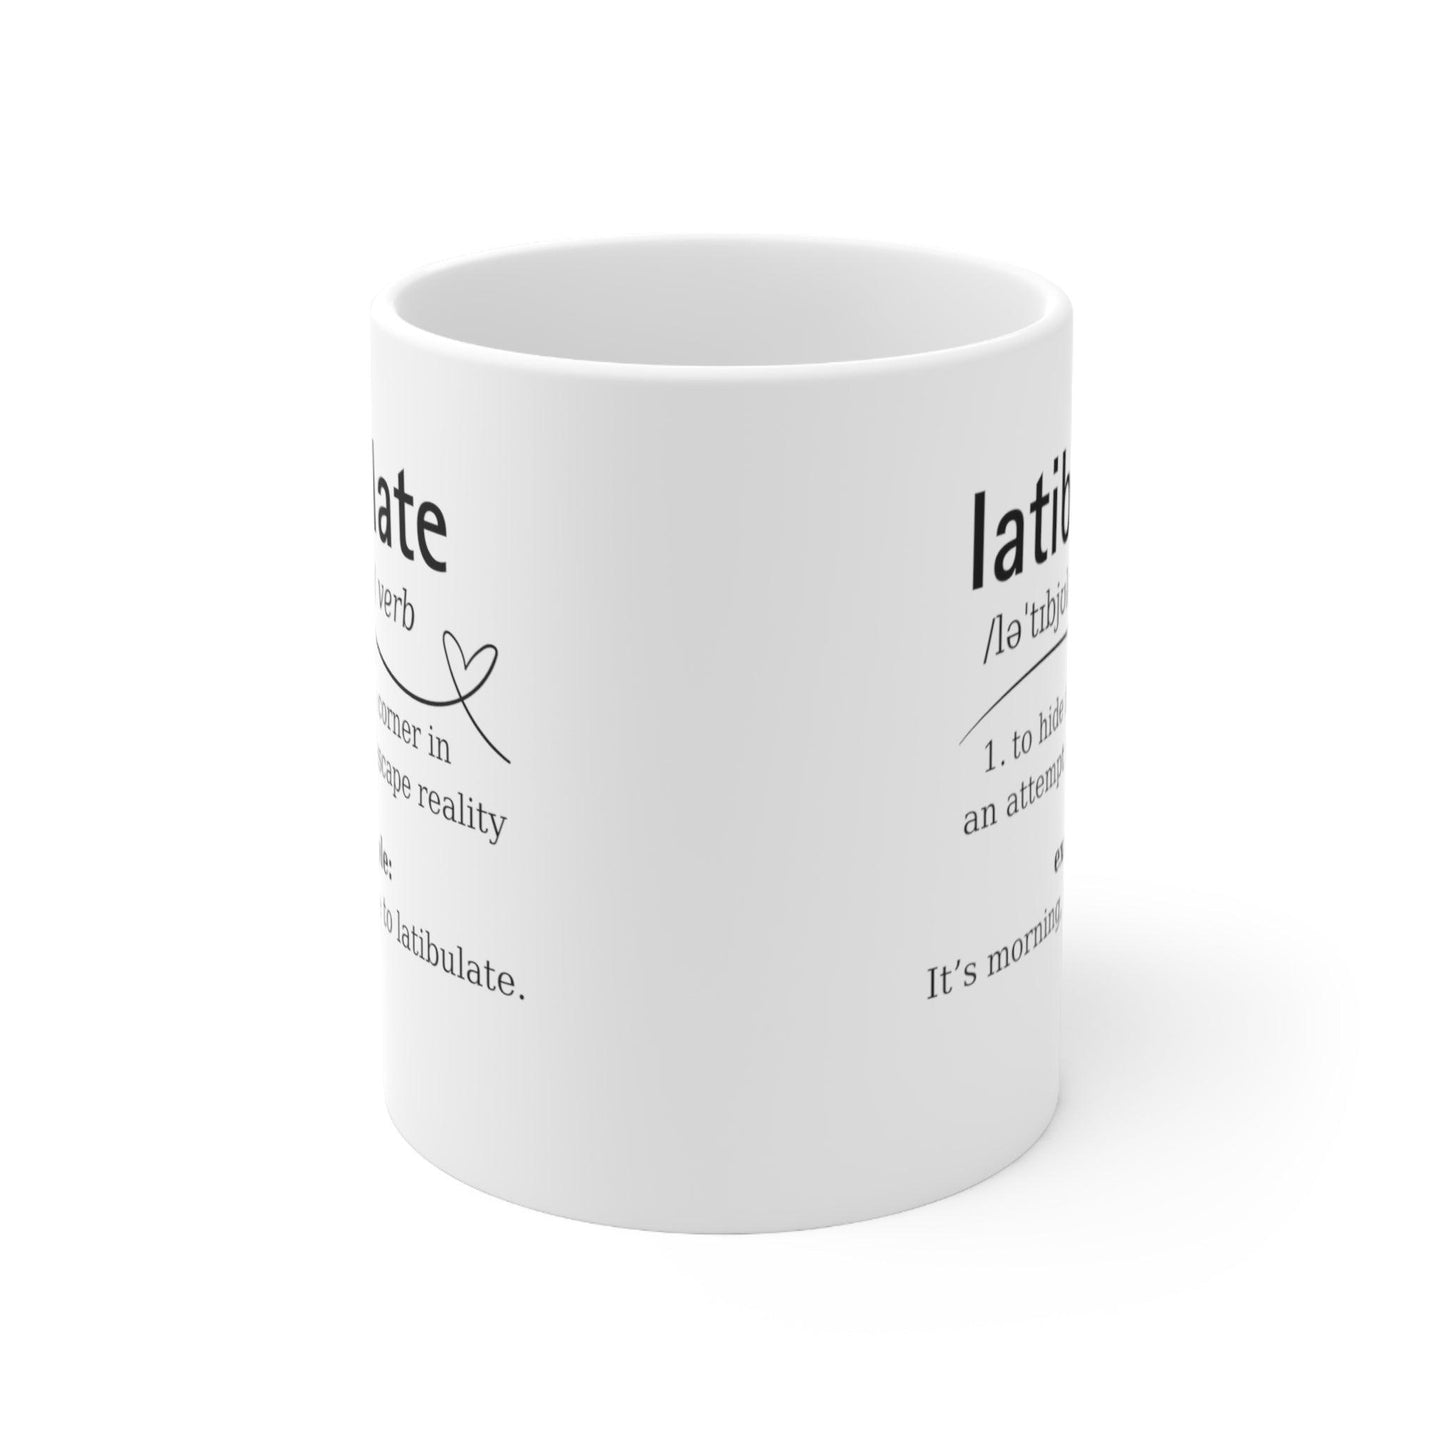 Latibulate Dictionary Mug - Funny ADHD Coffee Cup - Unique Word Lover Gift - Quirky Office Tea Mug - Fidget and Focus